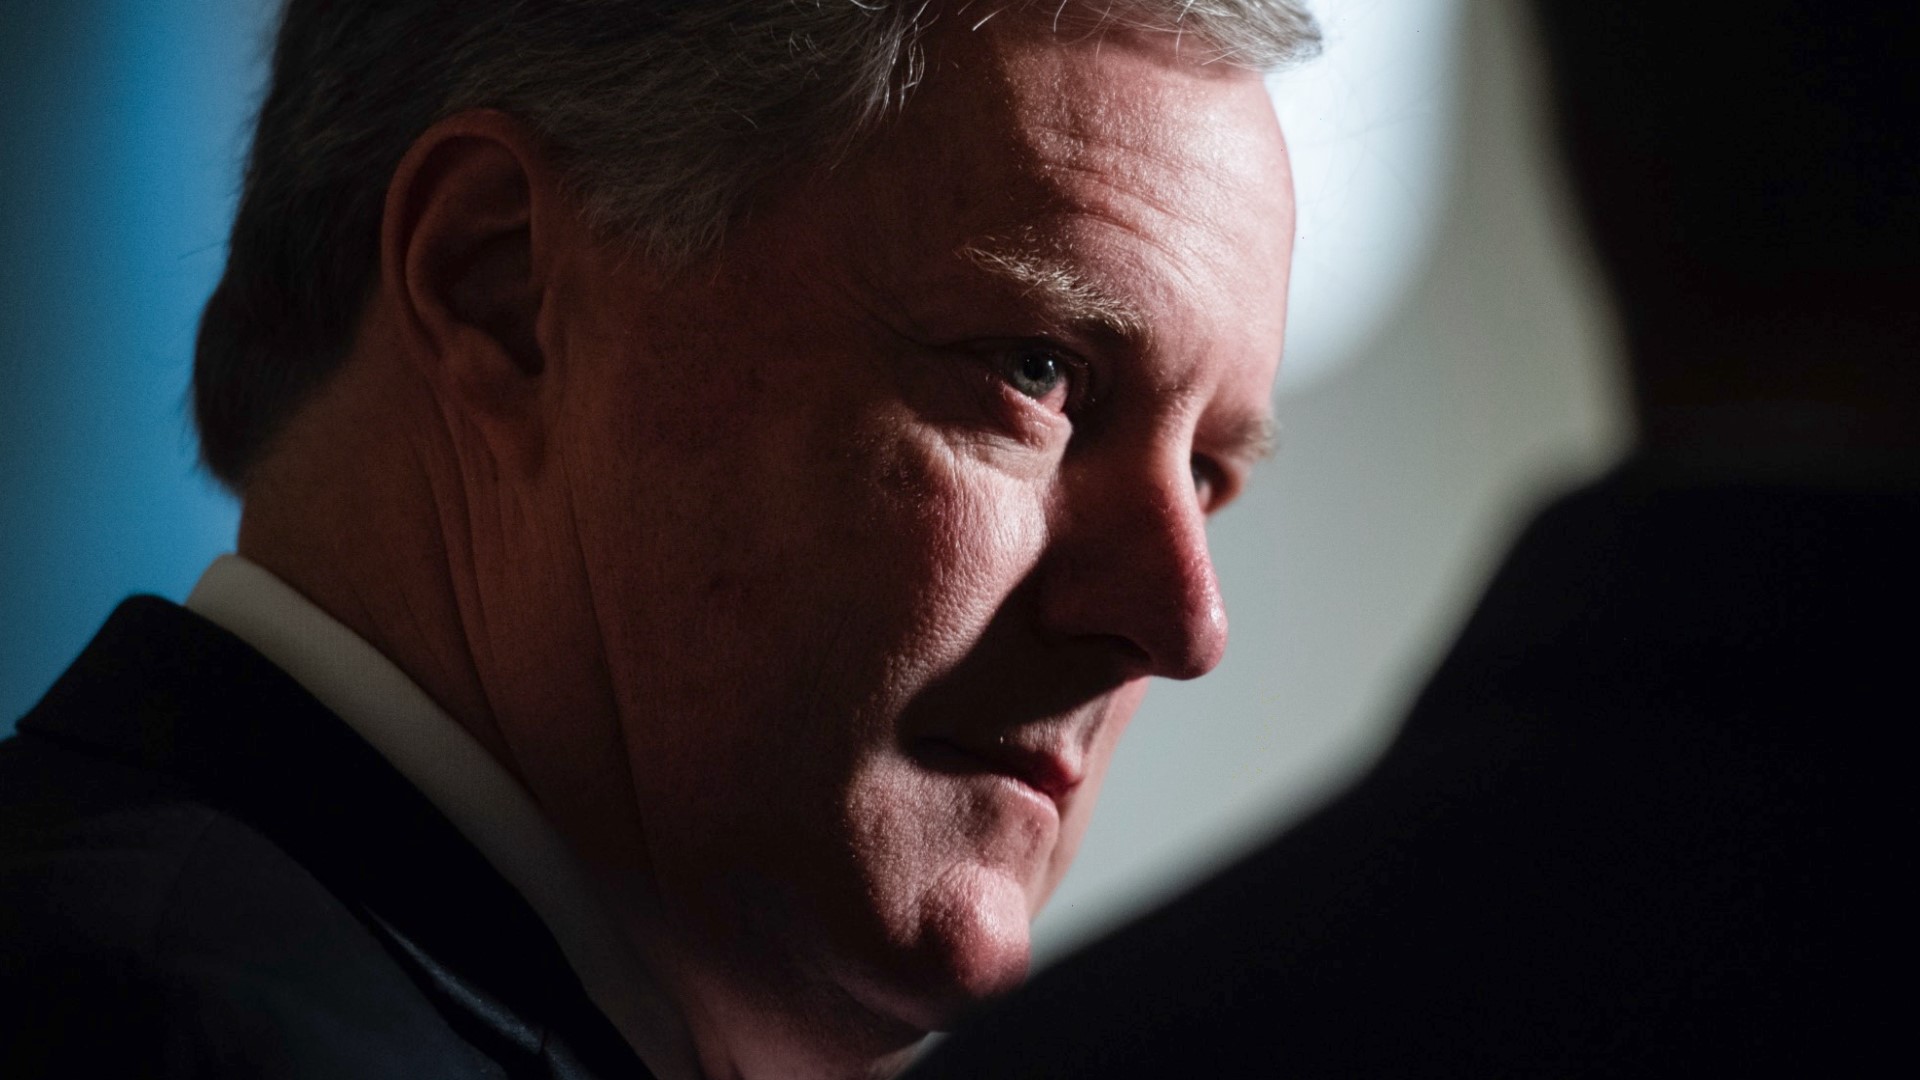 Former Trump administration chief of staff, Mark Meadows, may have committed voter fraud when he claimed to live in a mobile home in North Carolina. Veuer's Maria Mercedes Galuppo has the story.